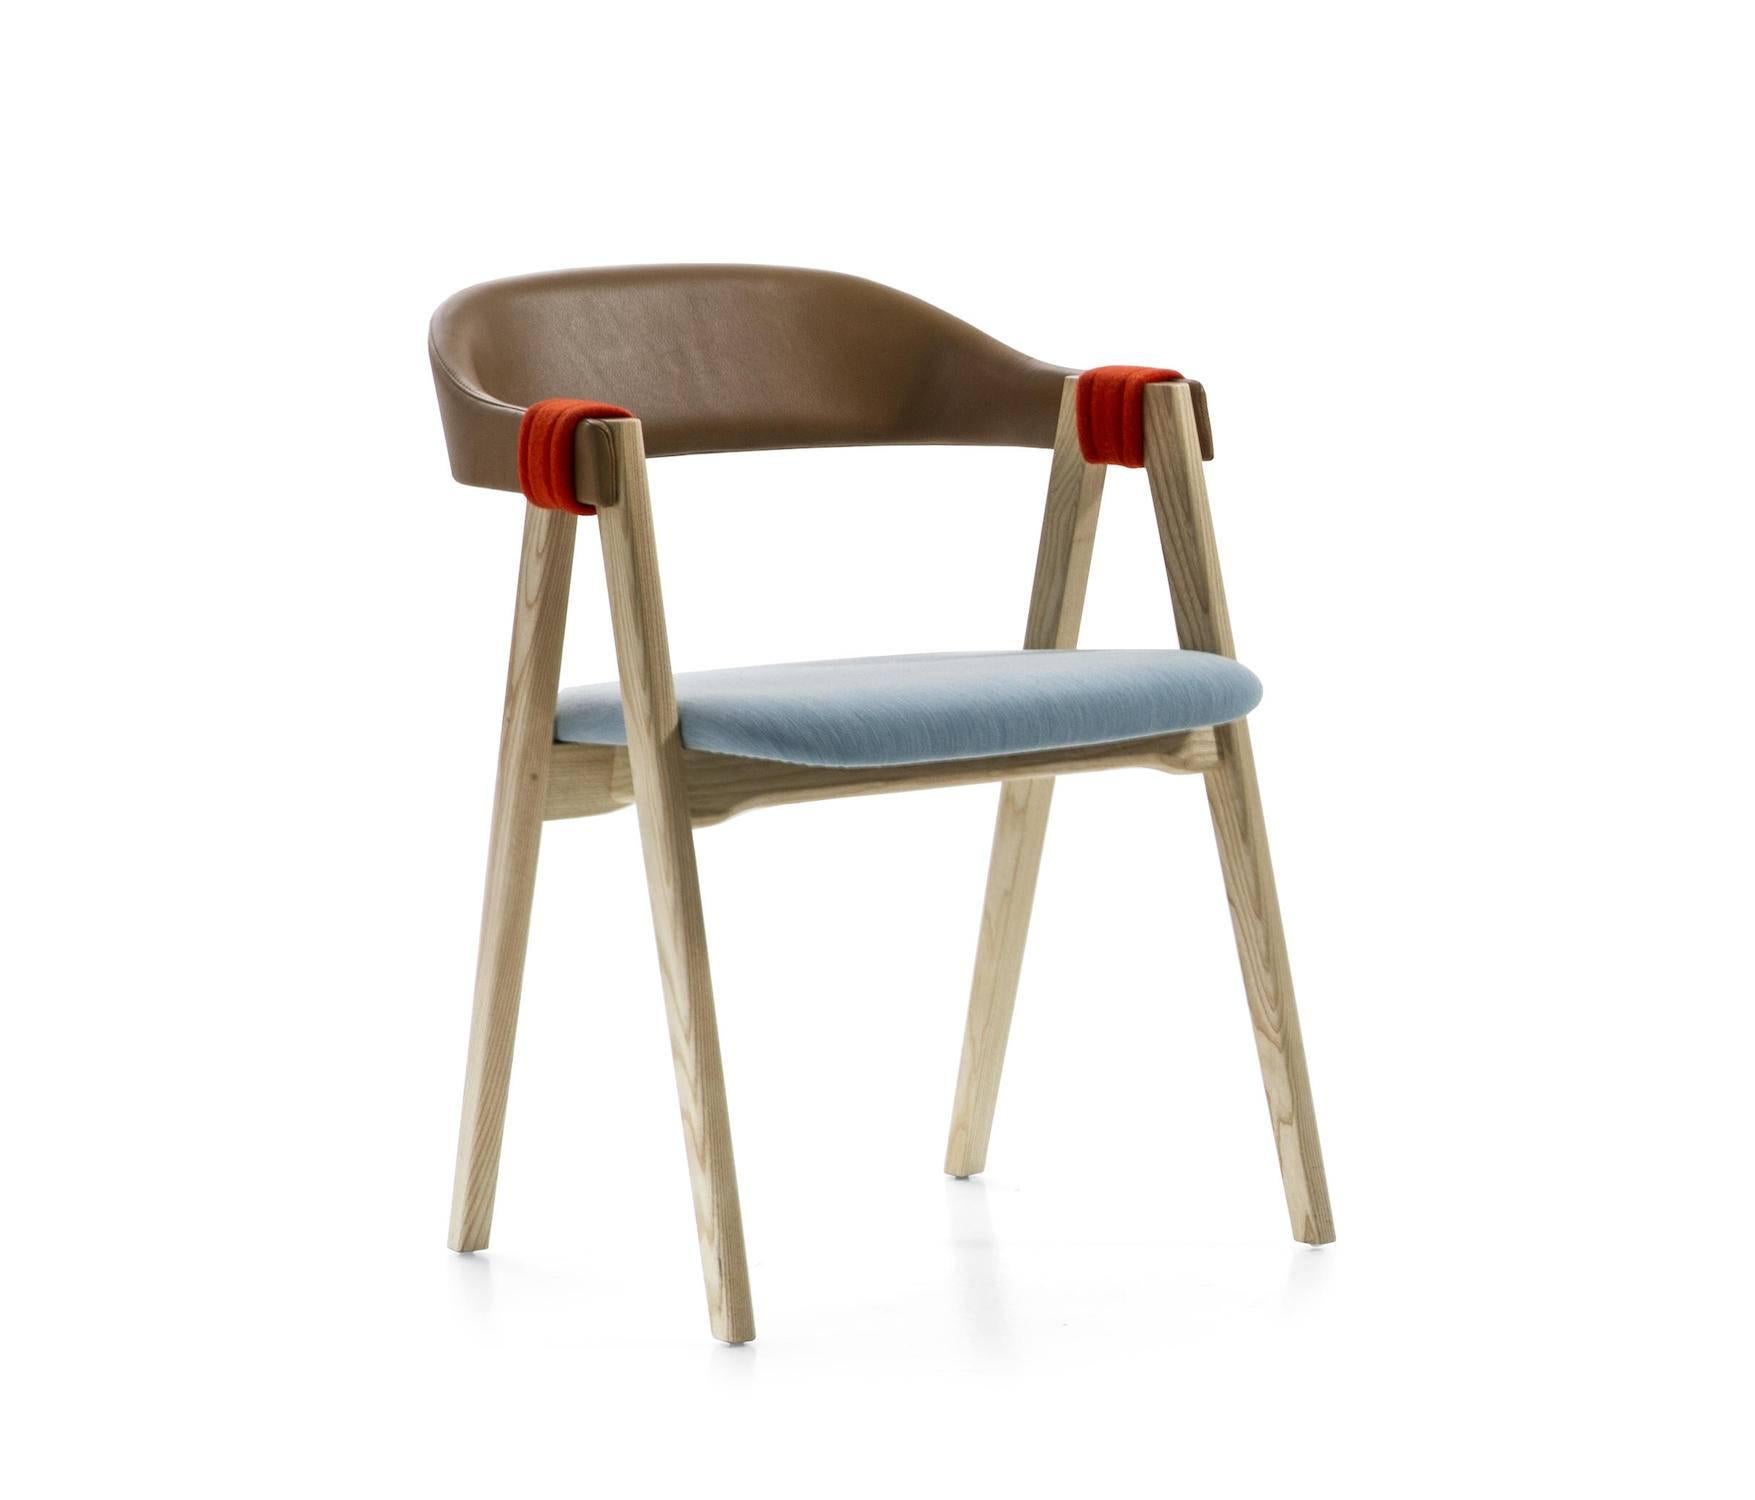 The Mathilda dining chair is produced with the seat and upholstered back in flame-retardant, stress-resistant polyurethane foam in varied densities on ash frame; raffiawrapped back is also available. Arm and leg connection is covered with fabric or